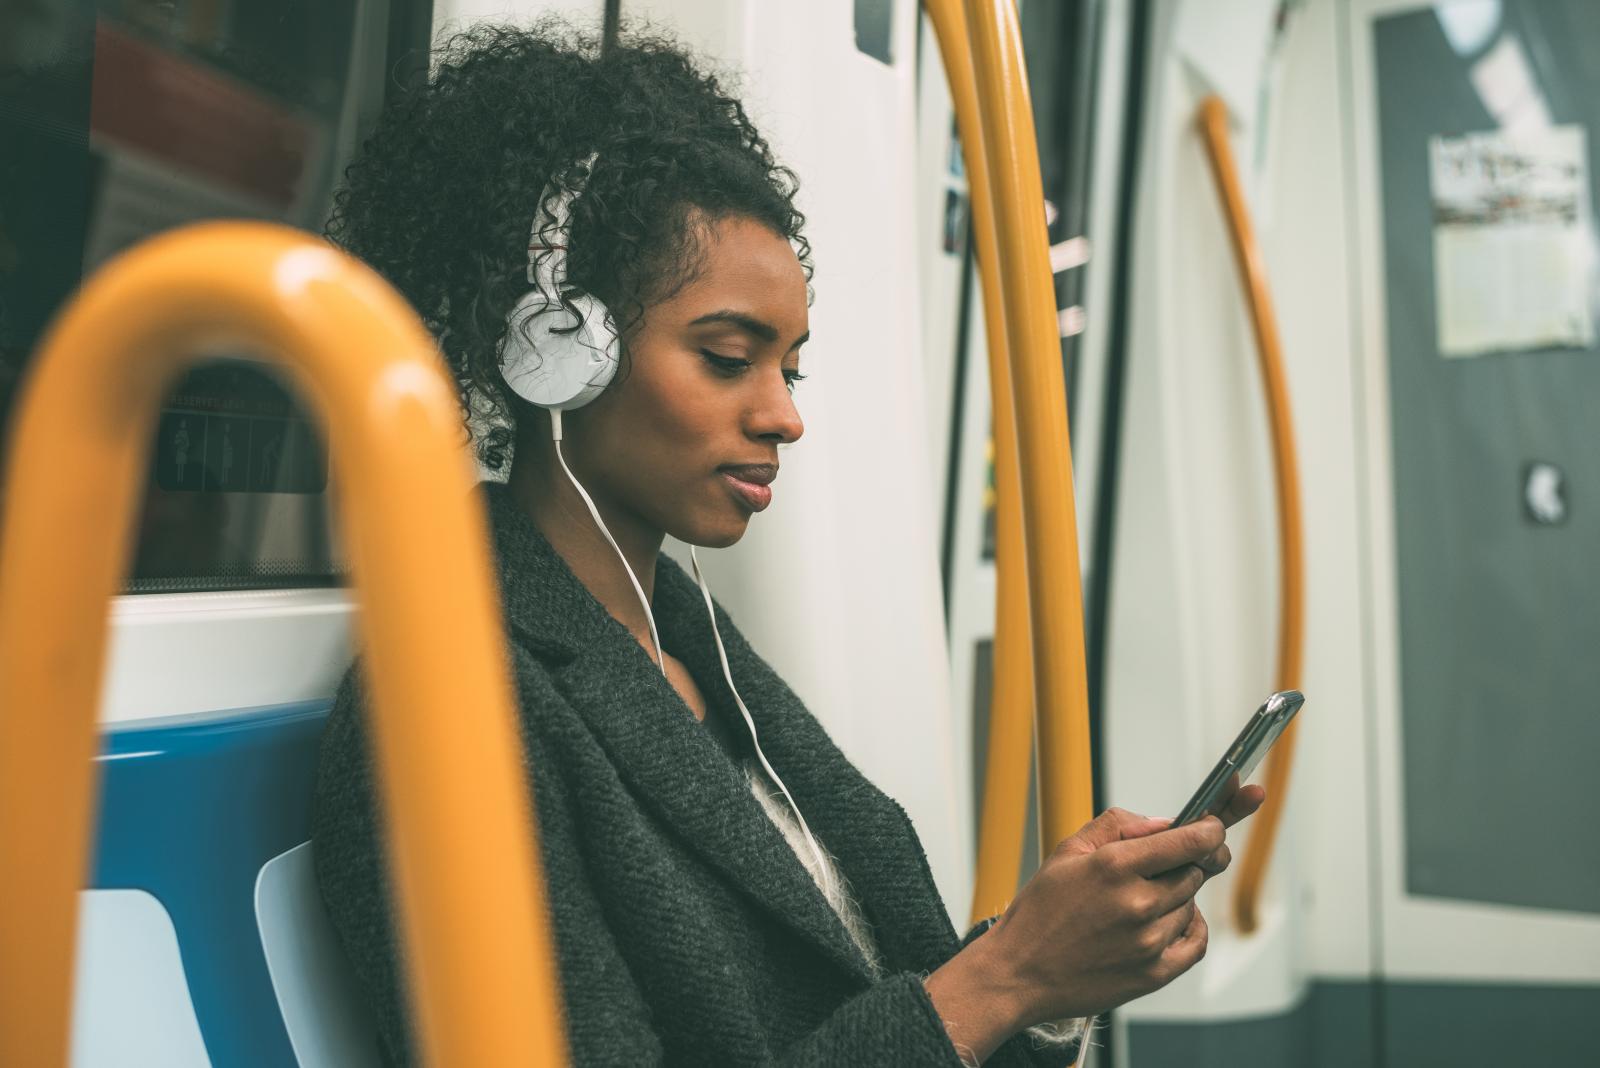 Woman on tube with phone and headphones